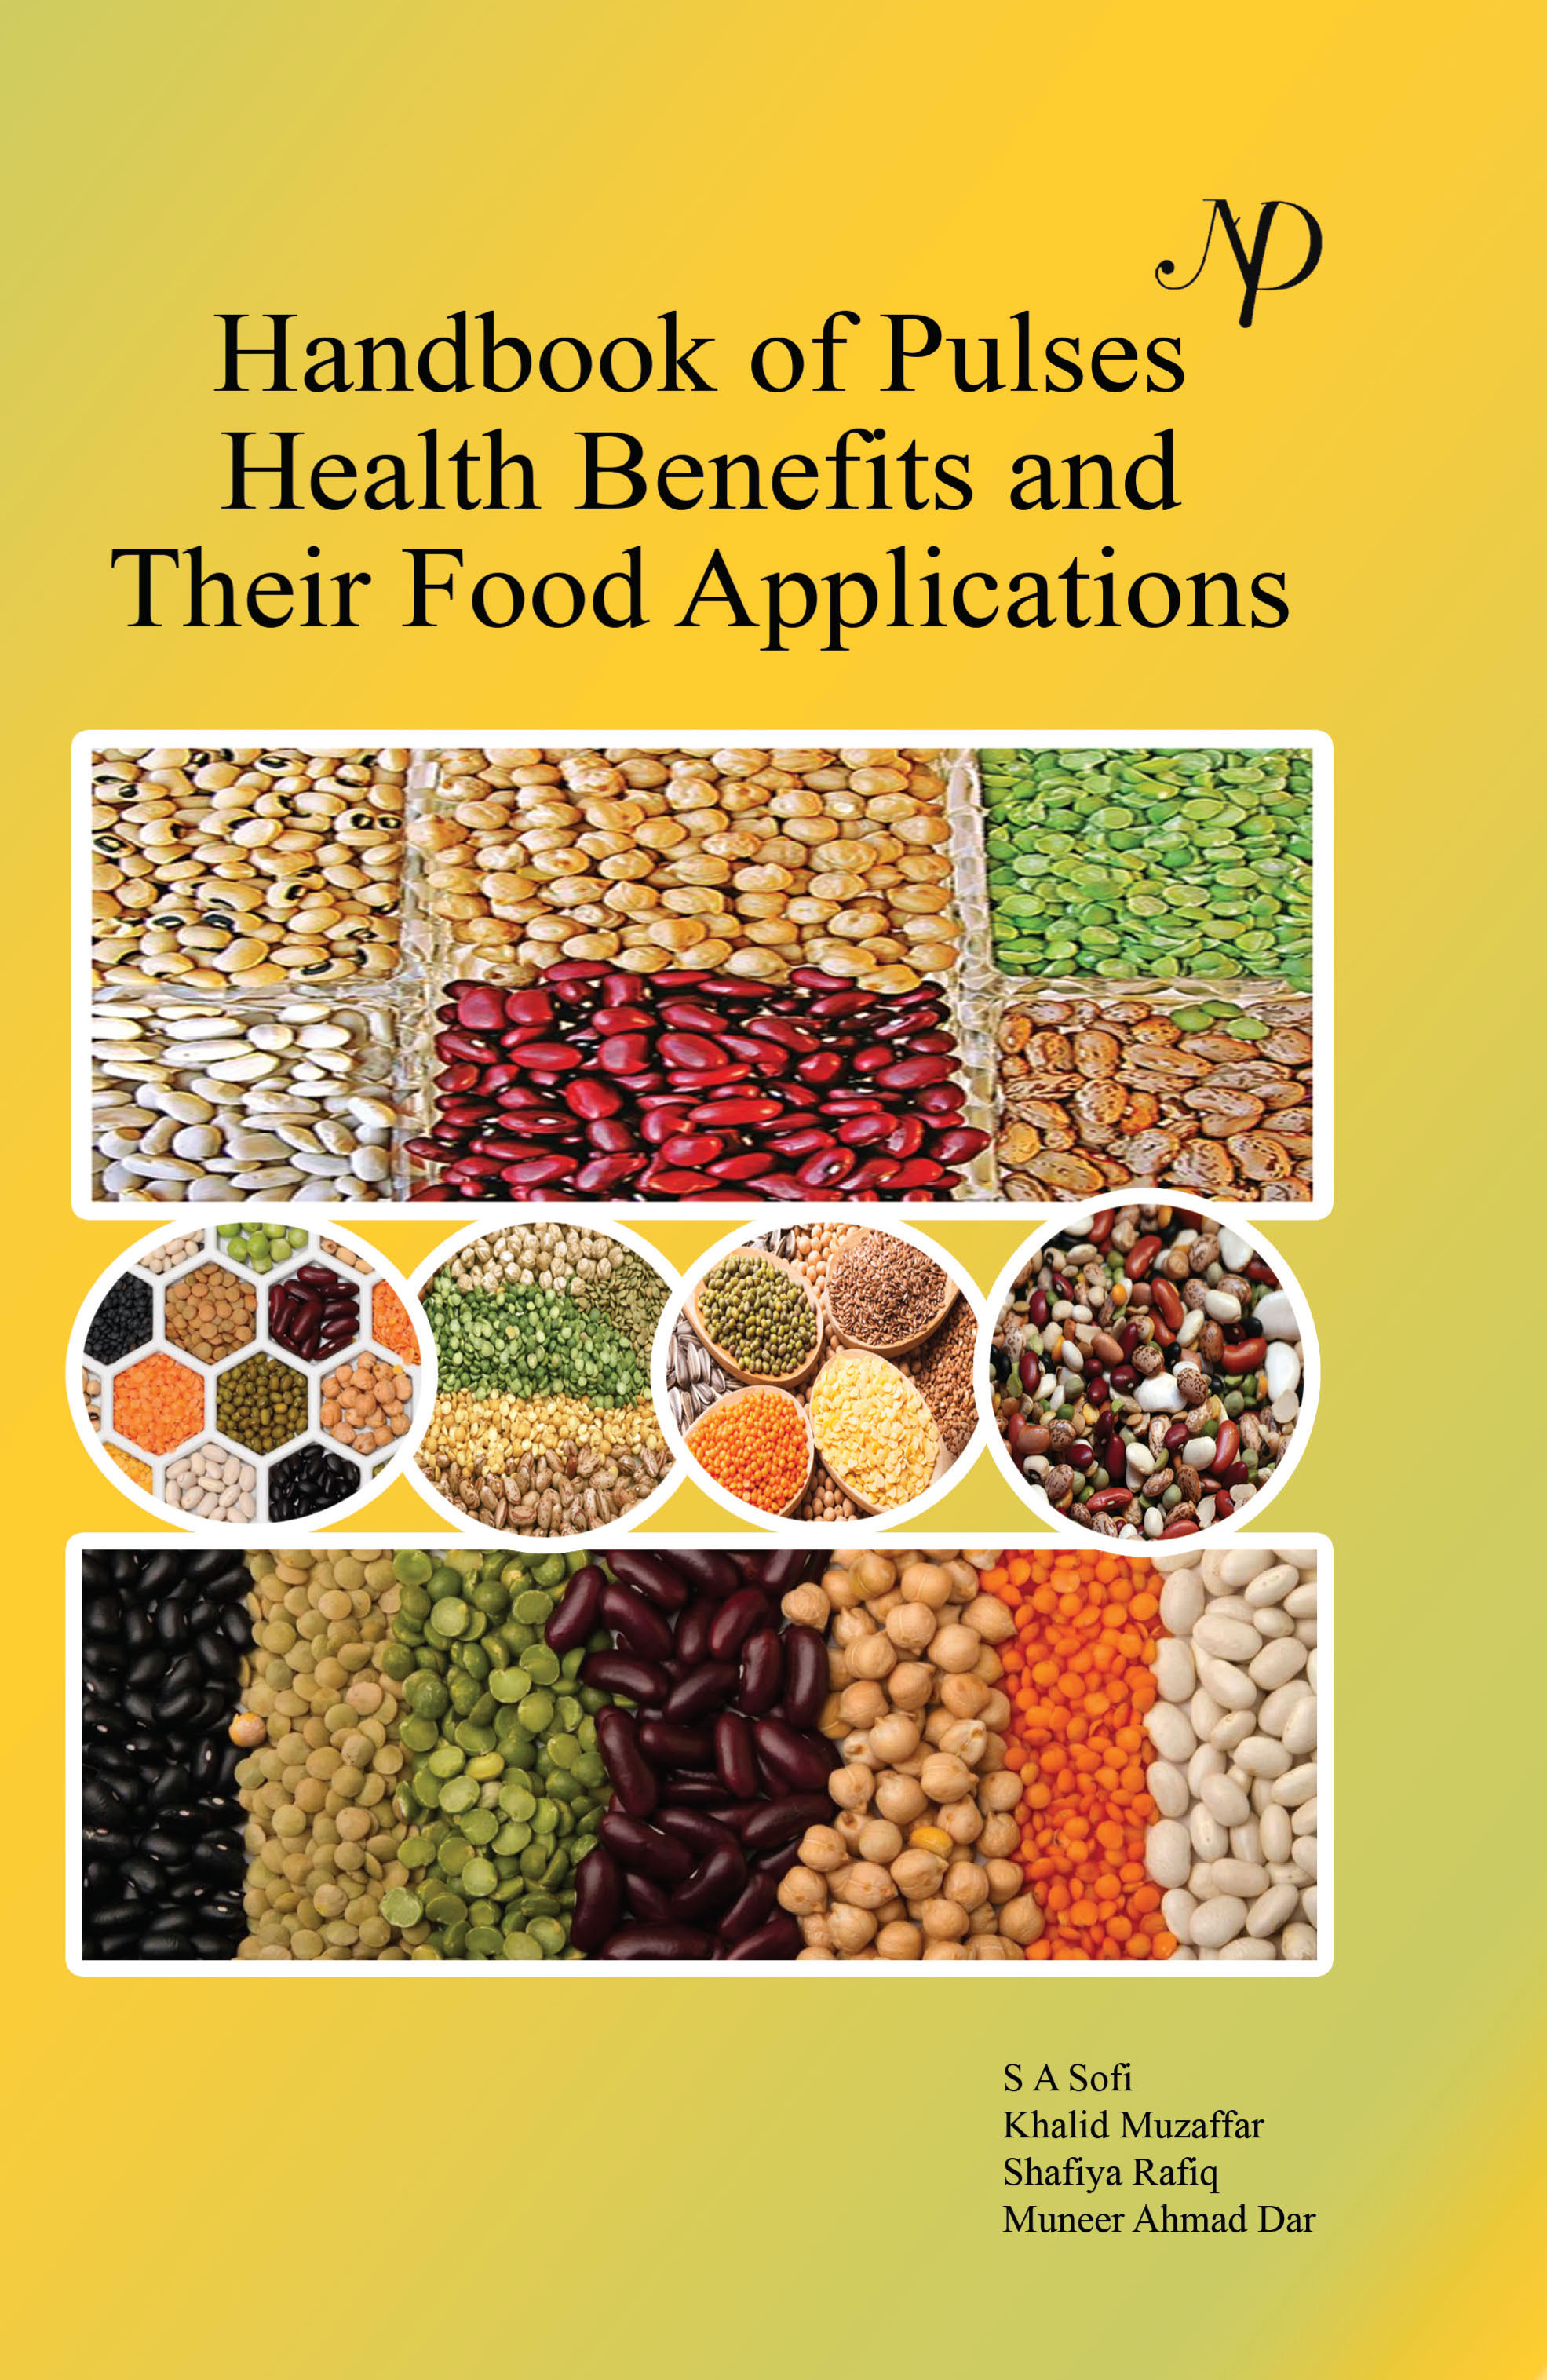 Handbook of Pulses and their applications Cover.jpg